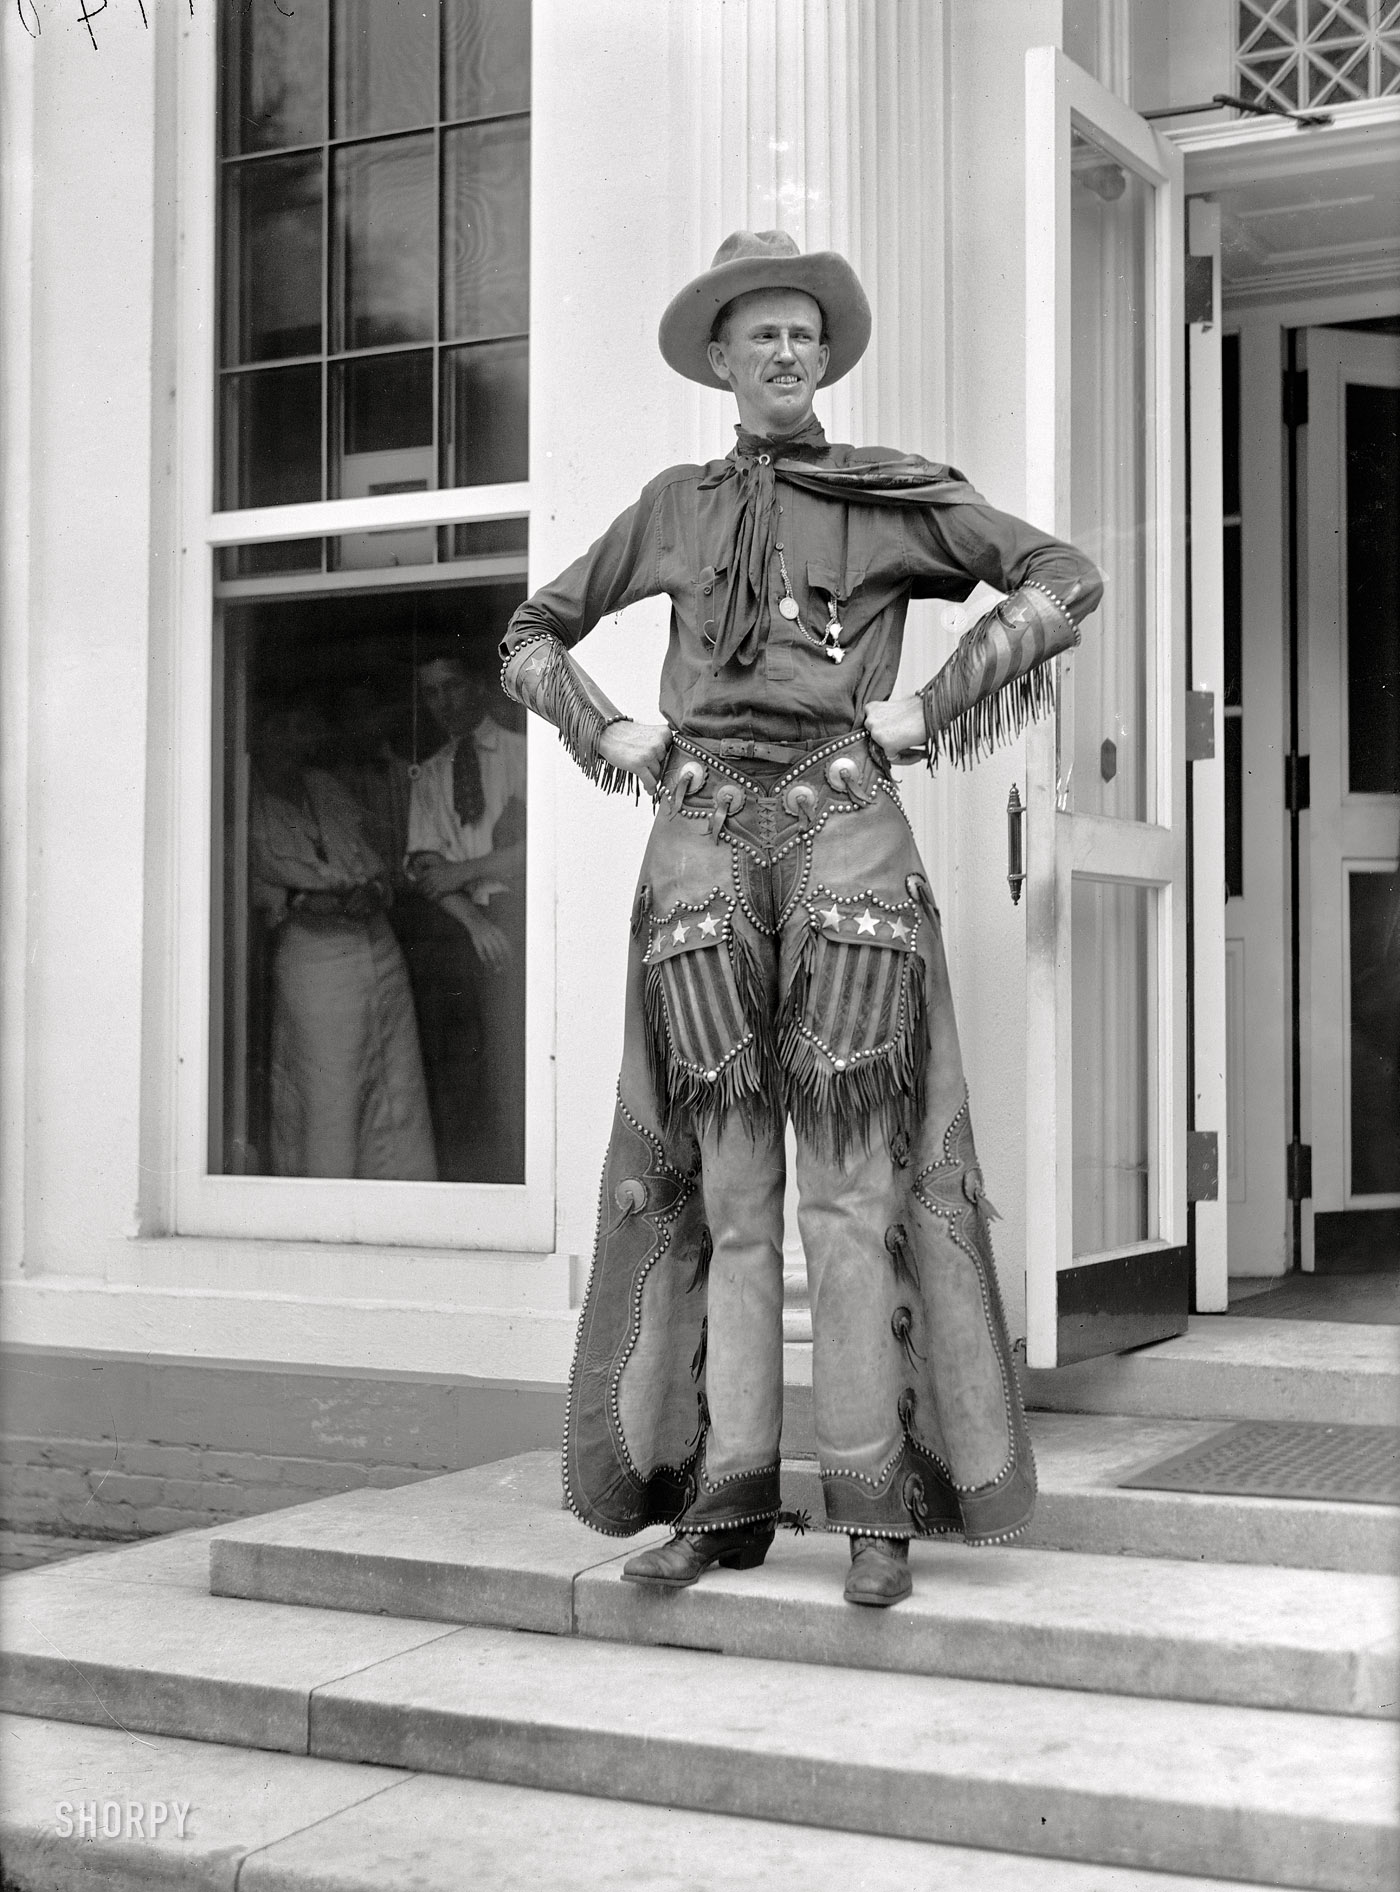 Washington, D.C., 1919. "Ralph E. Madsen, the tall cowboy, at White House." Harris & Ewing Collection glass negative. View full size.